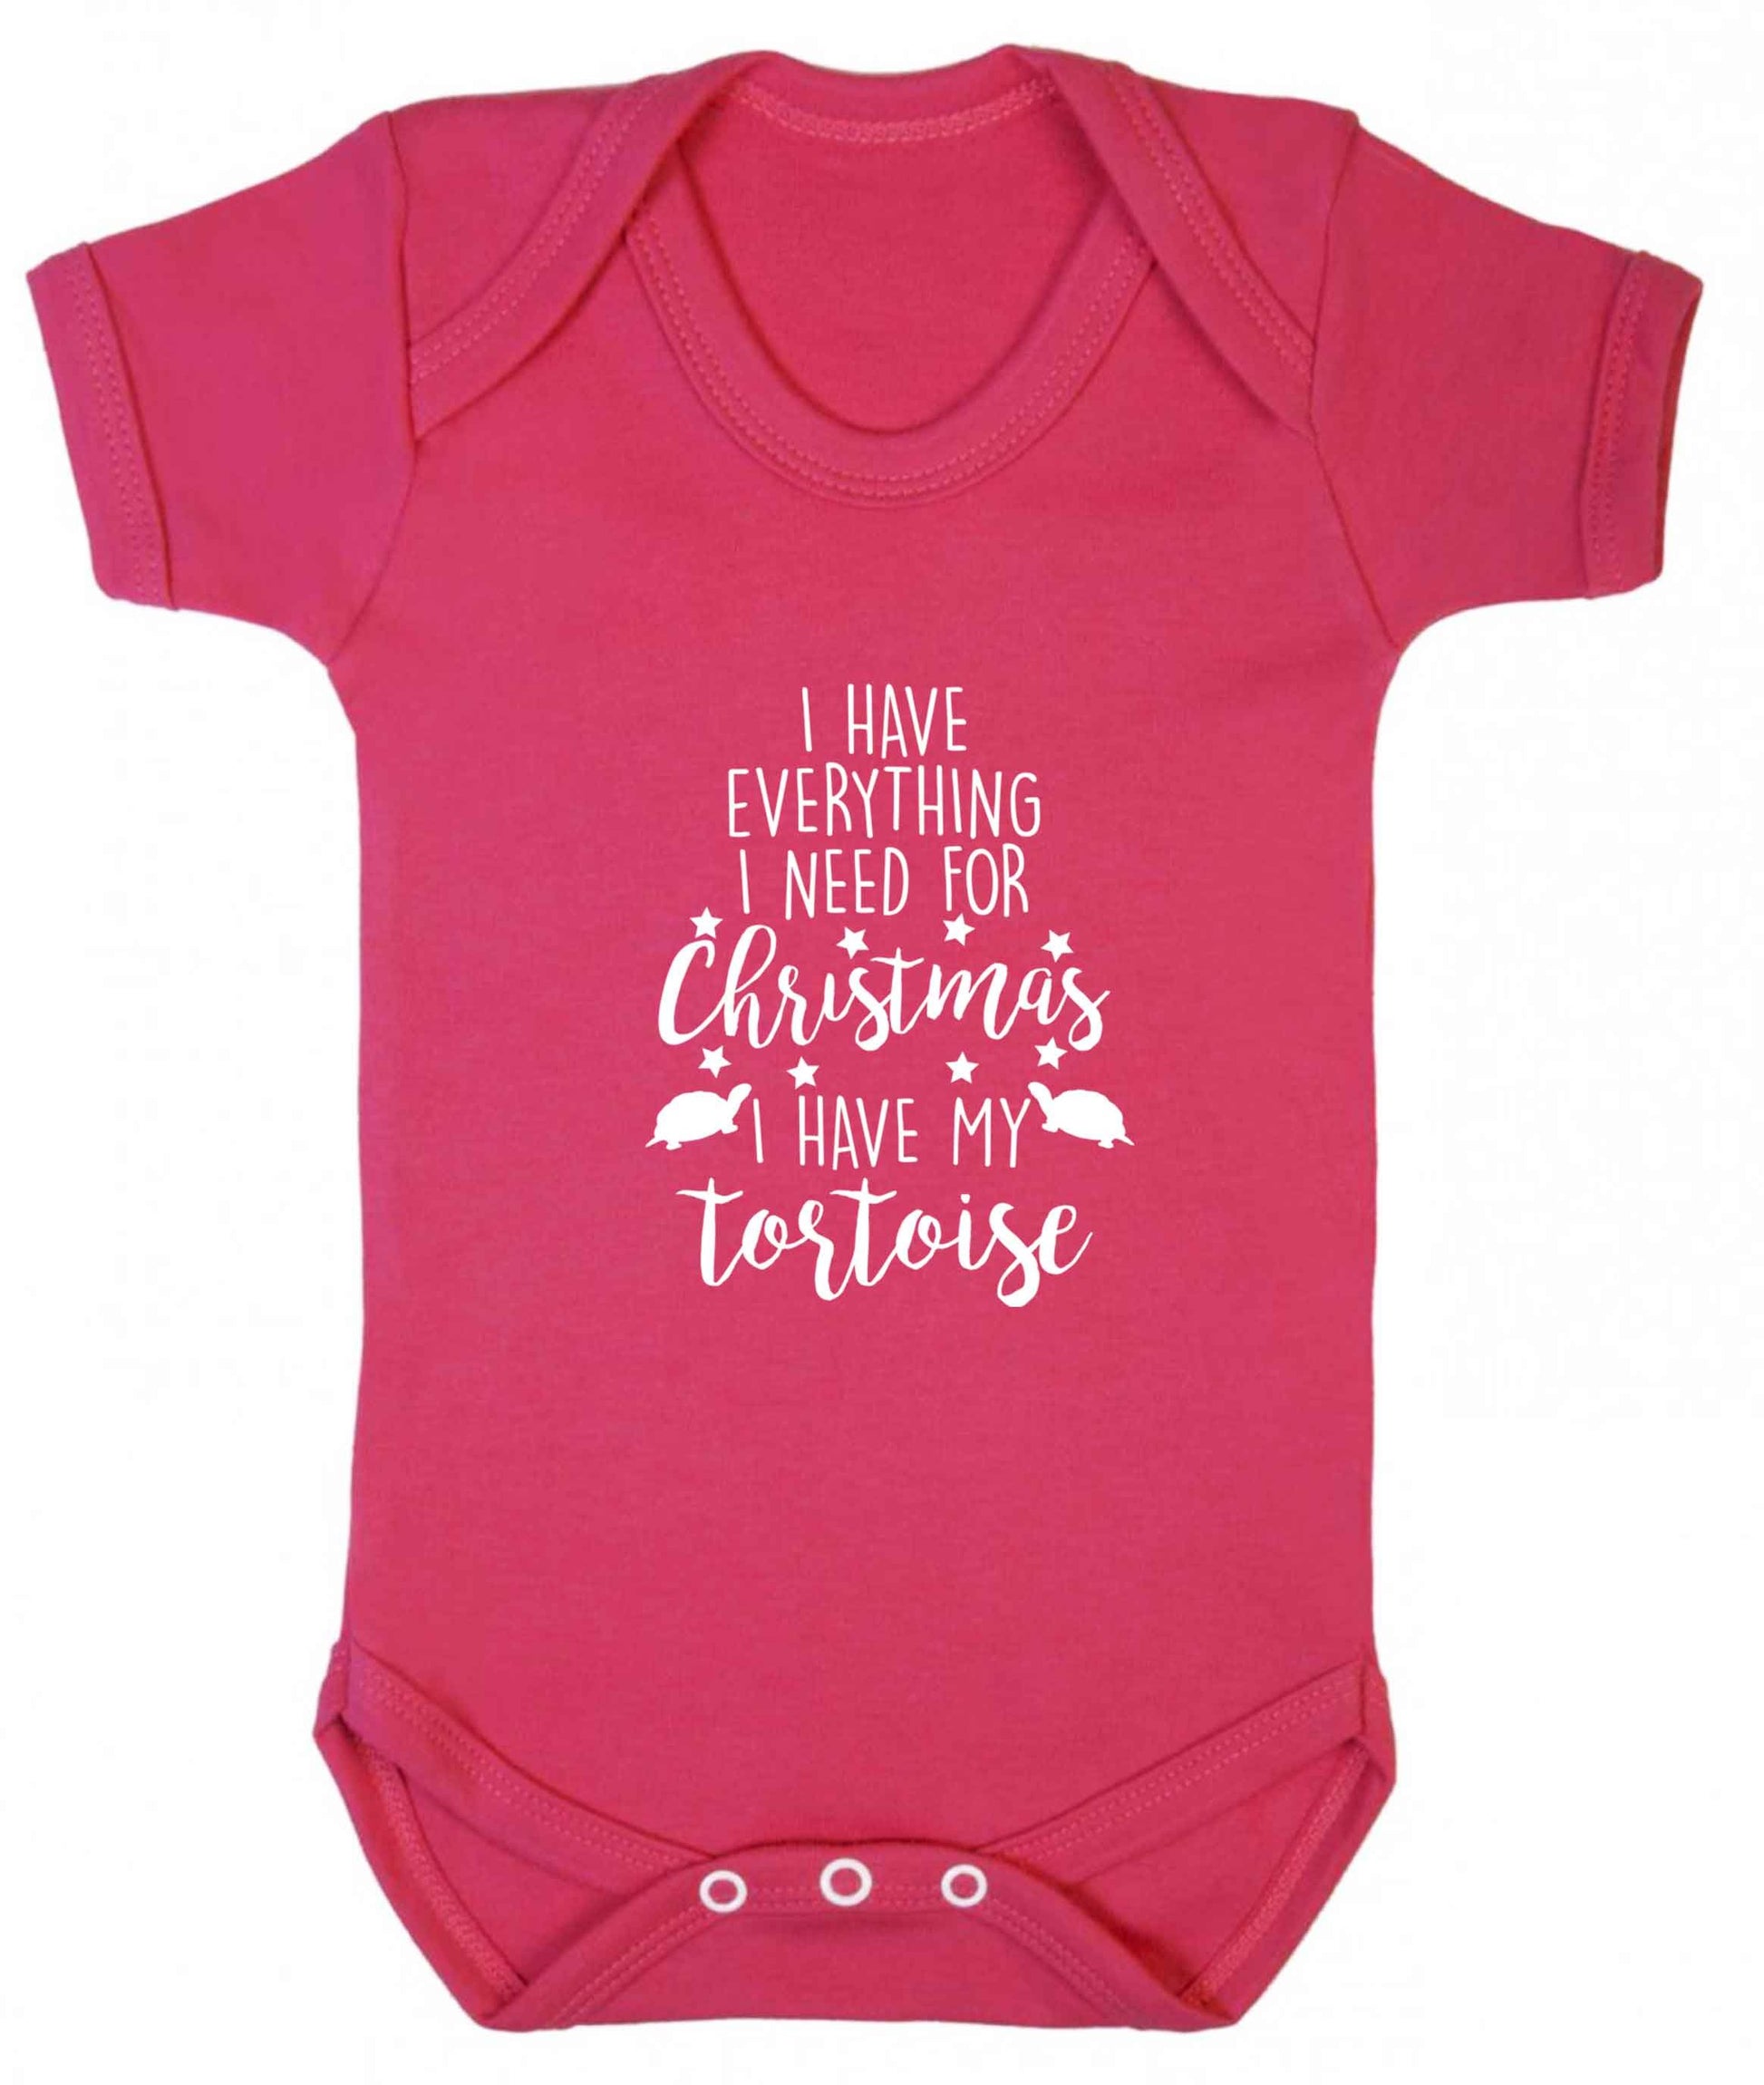 I have everything I need for Christmas I have my tortoise baby vest dark pink 18-24 months